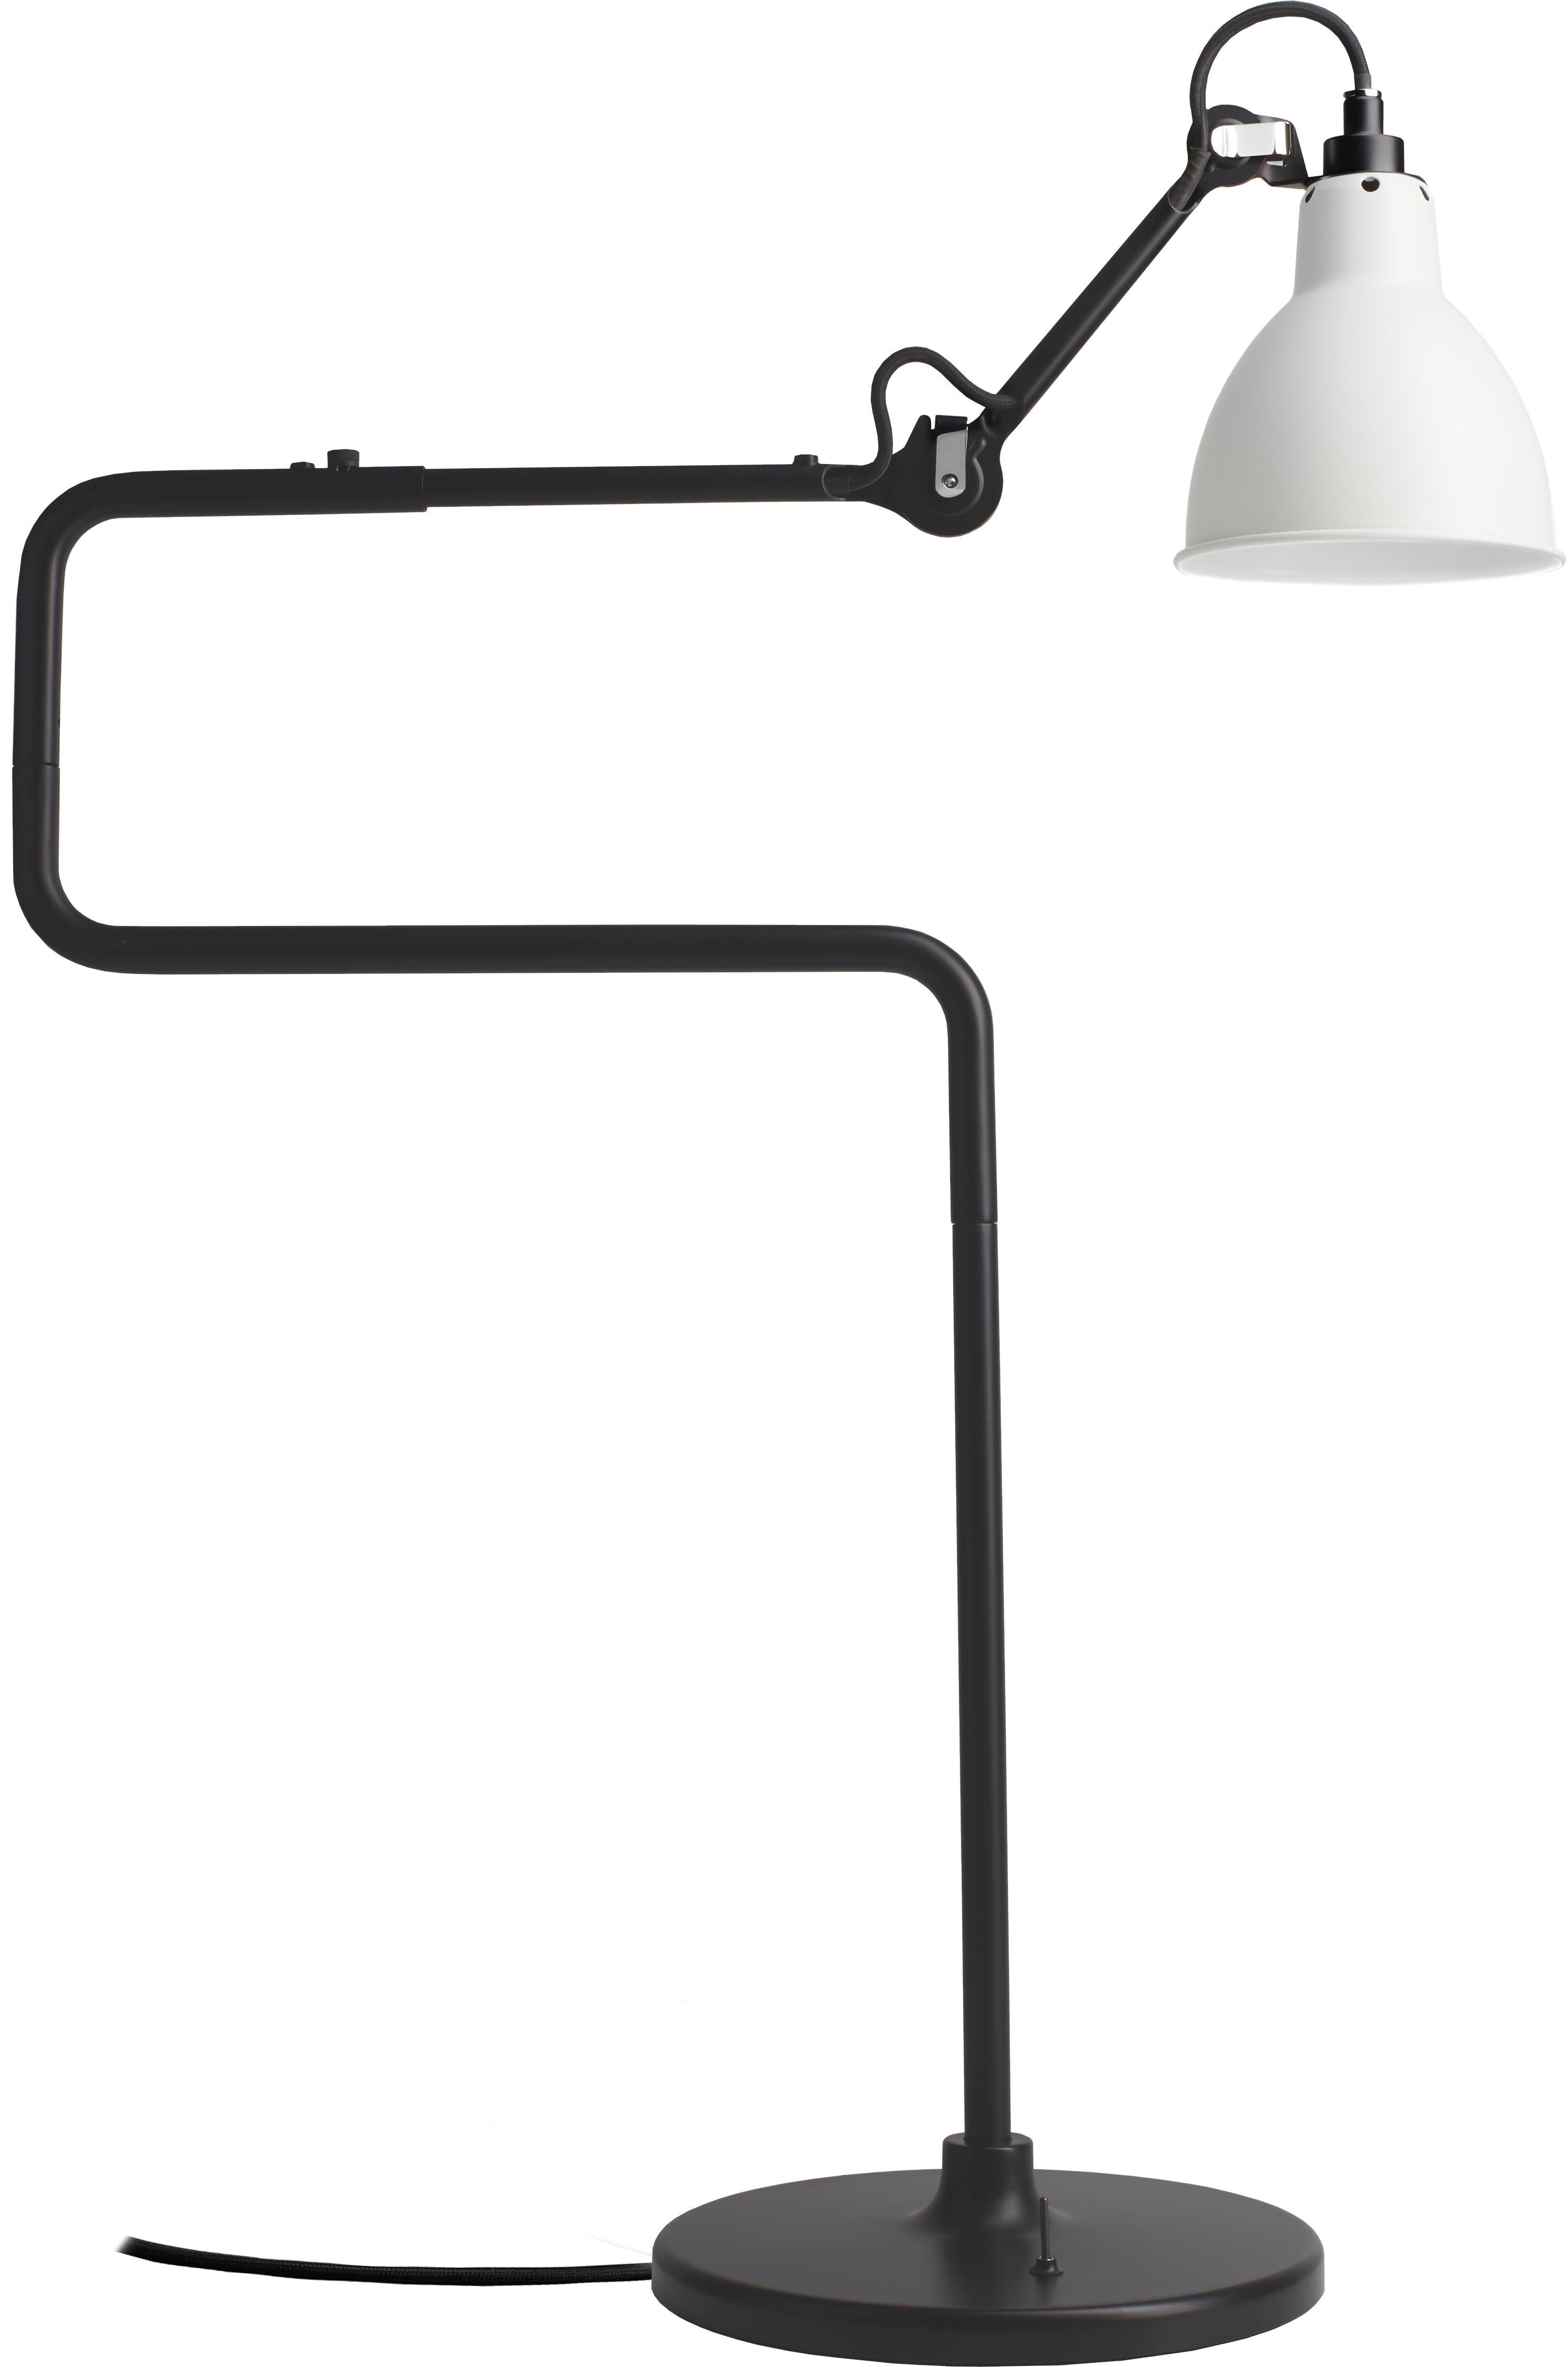 DCW Editions La Lampe Gras N°317 Table Lamp in Black Arm with White Shade